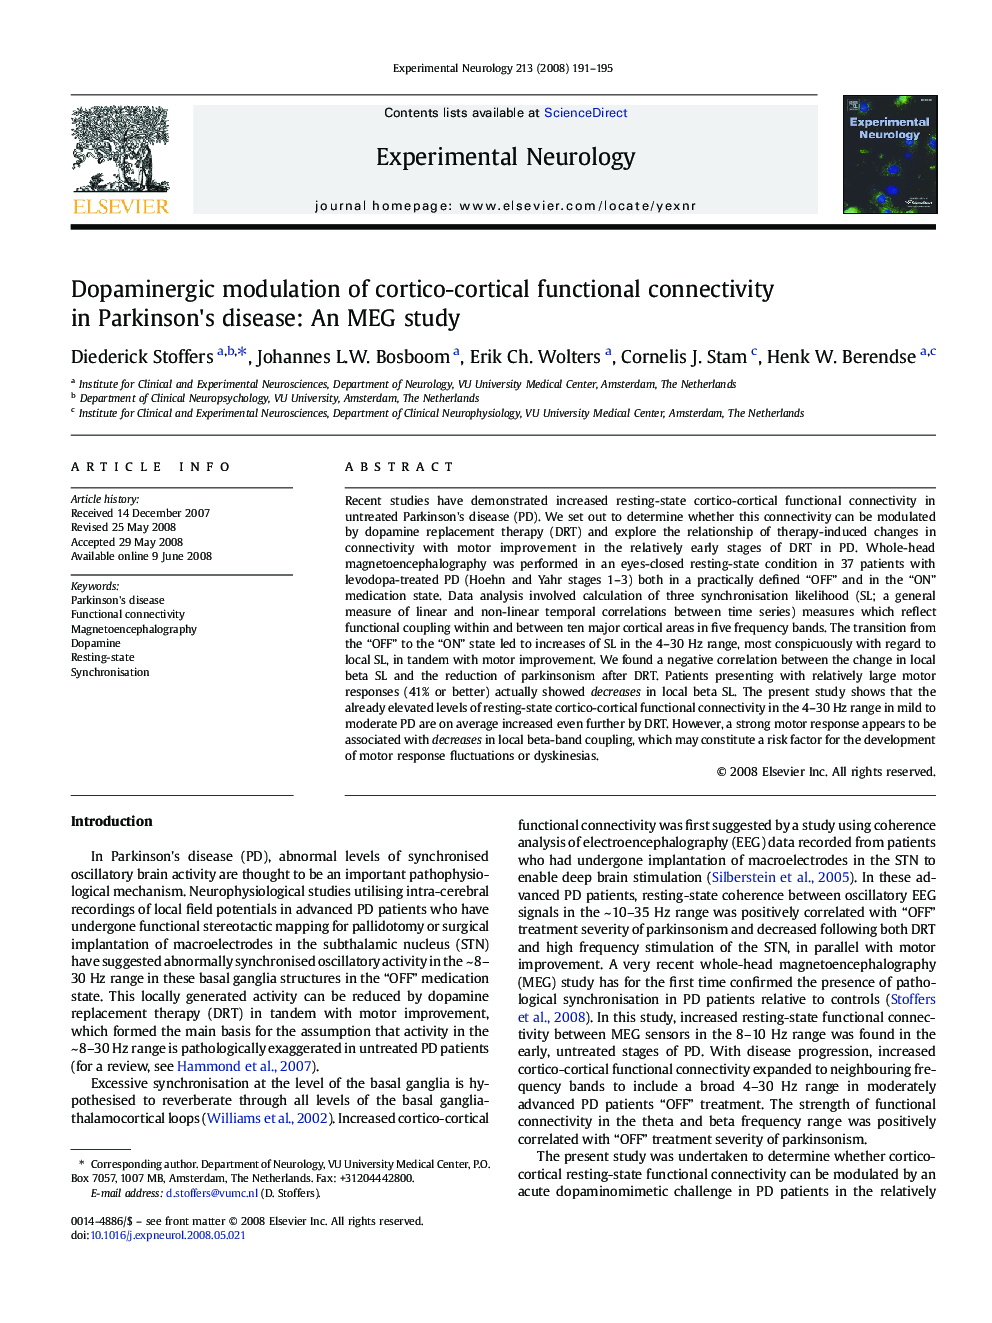 Dopaminergic modulation of cortico-cortical functional connectivity in Parkinson's disease: An MEG study